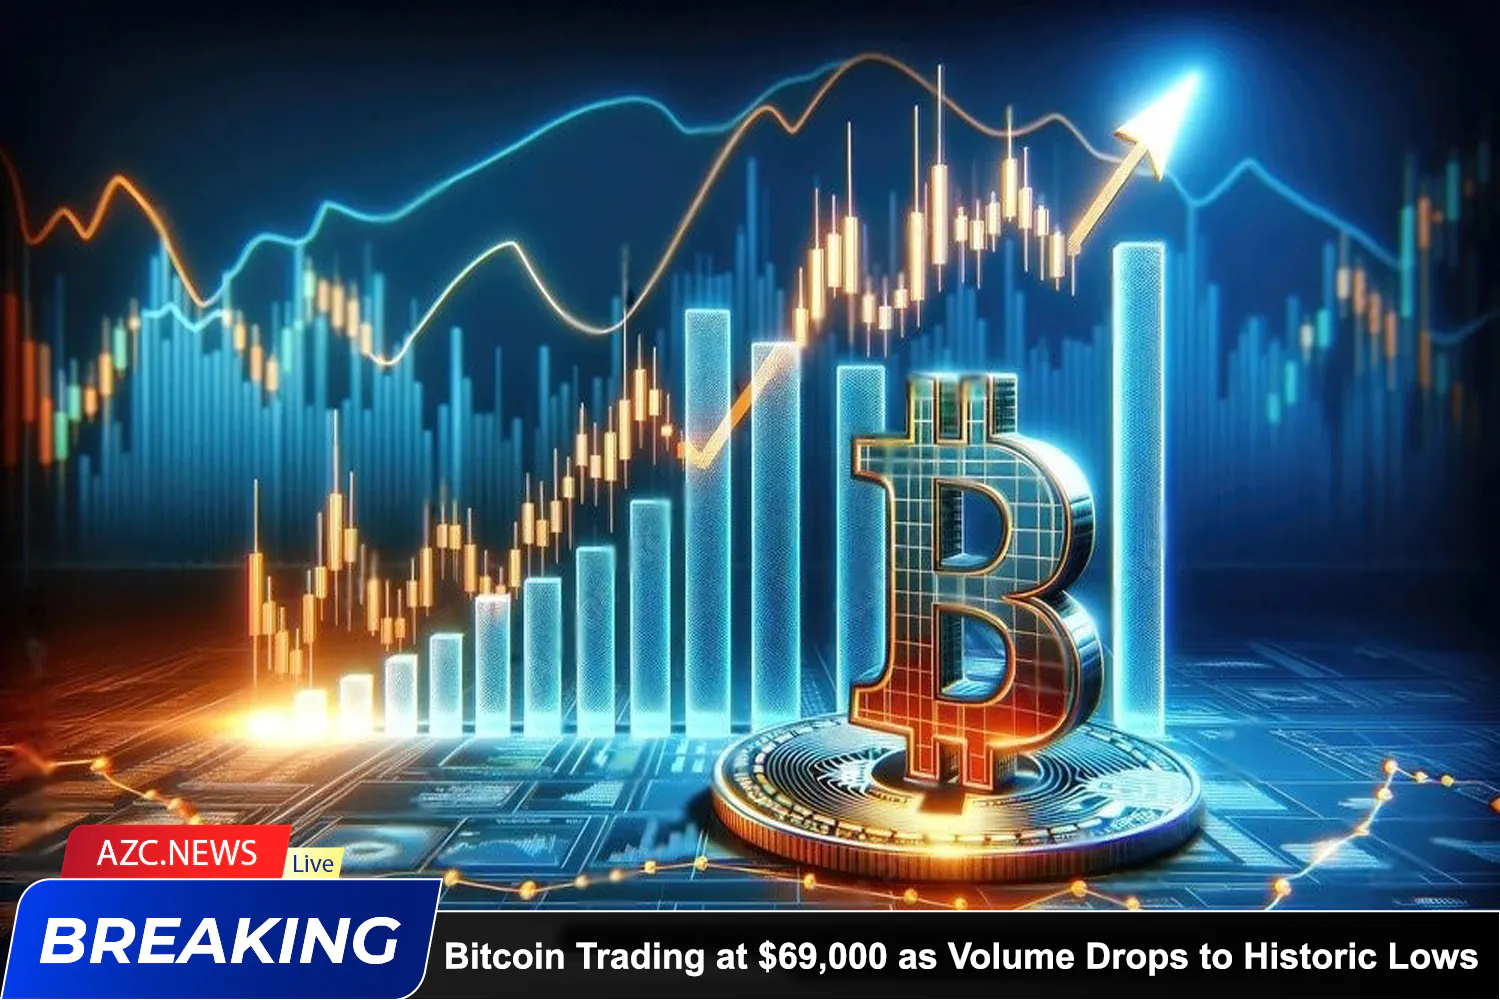 Azcnews Bitcoin Trading At $69,000 As Volume Drops To Historic Lows